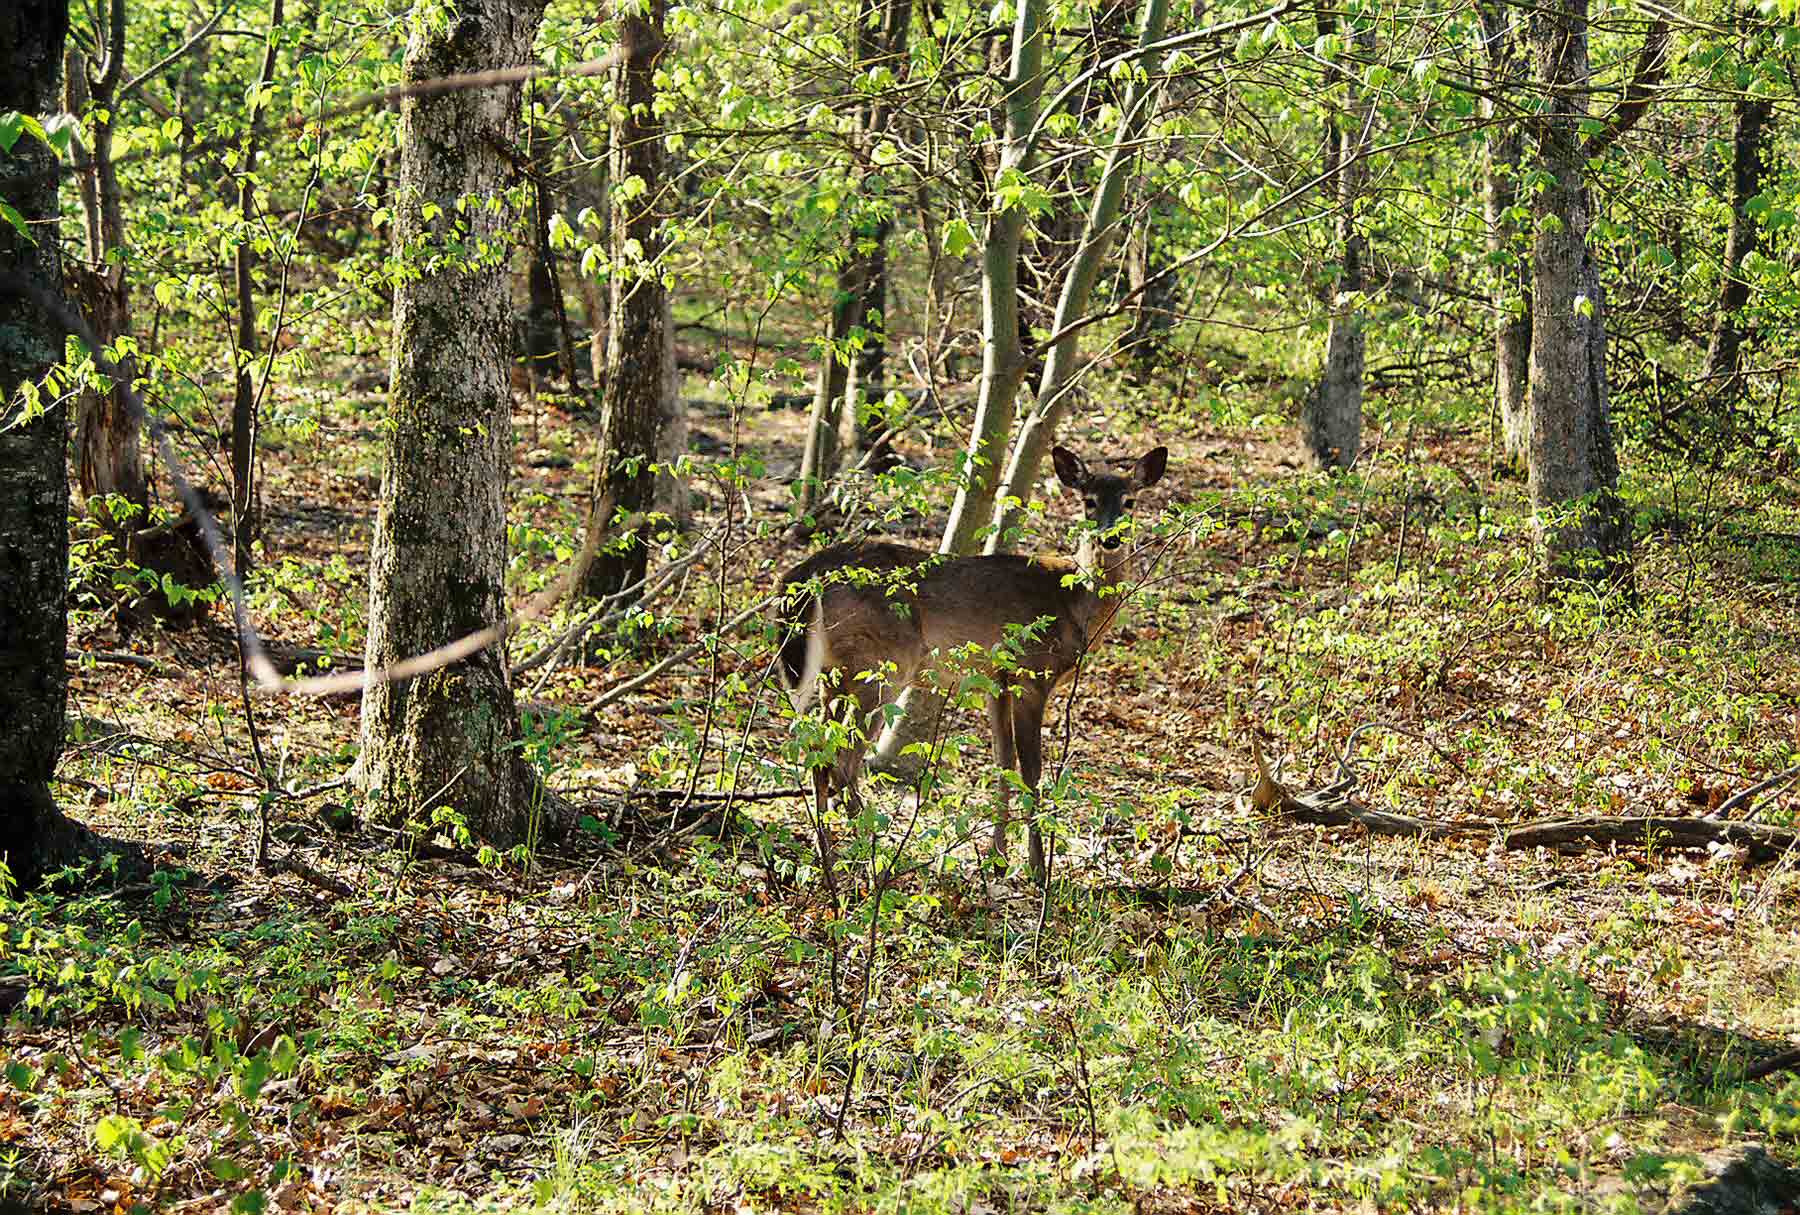 A Shenandoah deer. They are very numerous and totally unafraid of people.  Courtesy dlcul@conncoll.edu